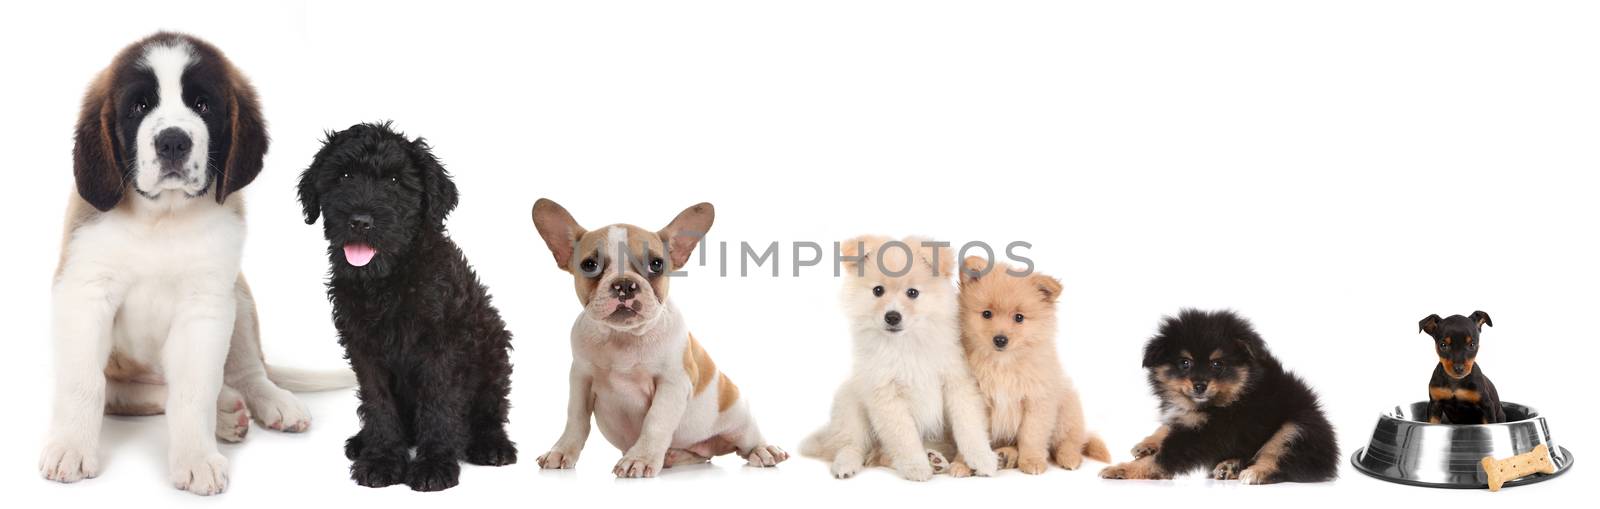 Different Breeds of Puppy Dogs on White by tobkatrina